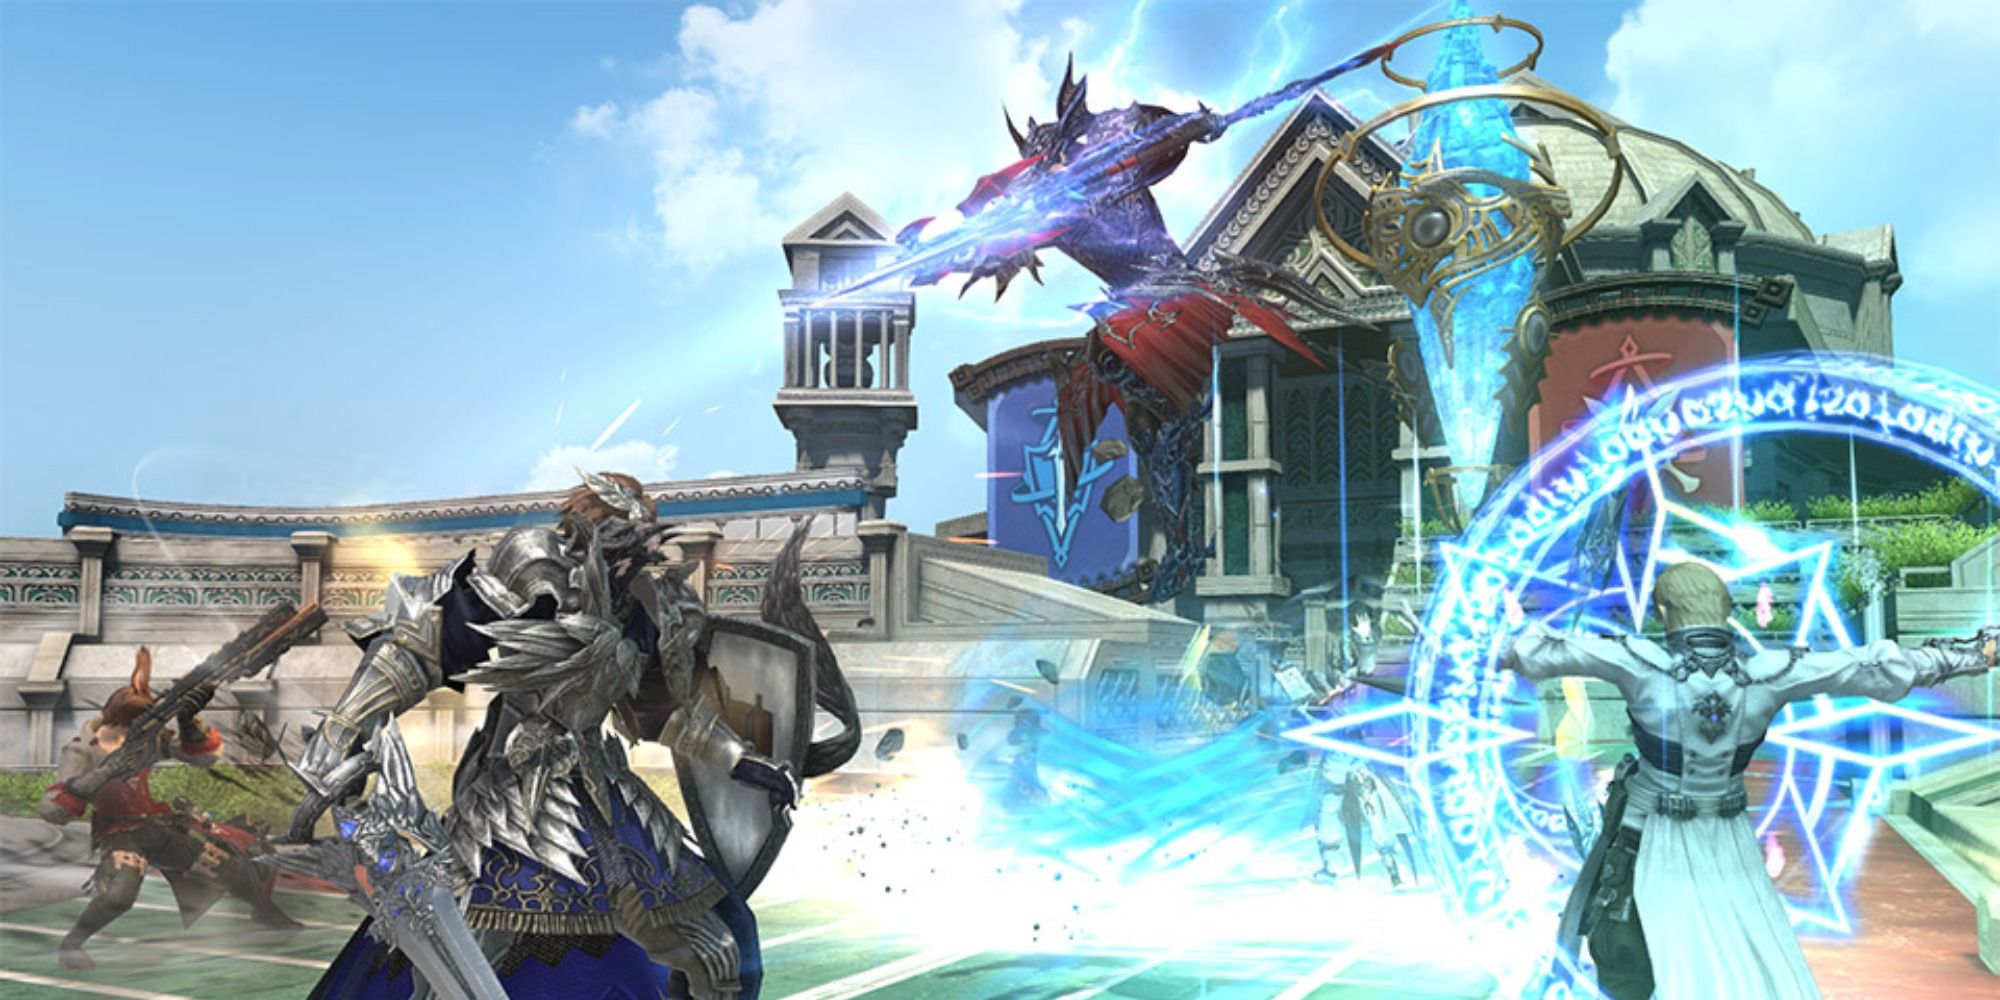 Promotional screenshot of a Crystalline Conflict Match in Final Fantasy 14